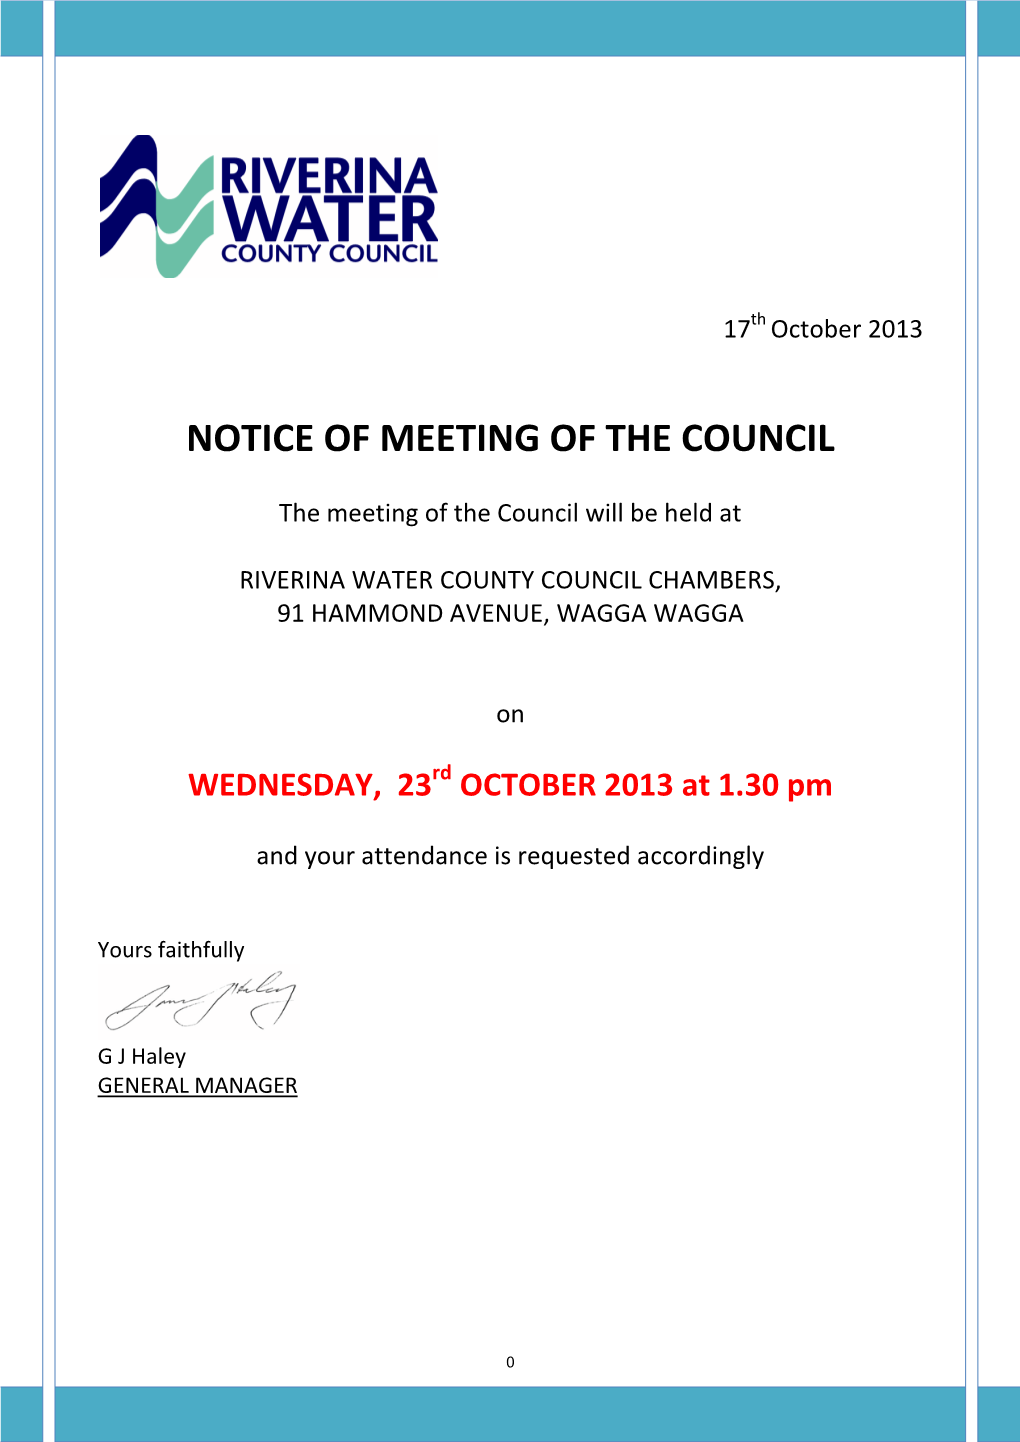 Notice of Meeting of the Council